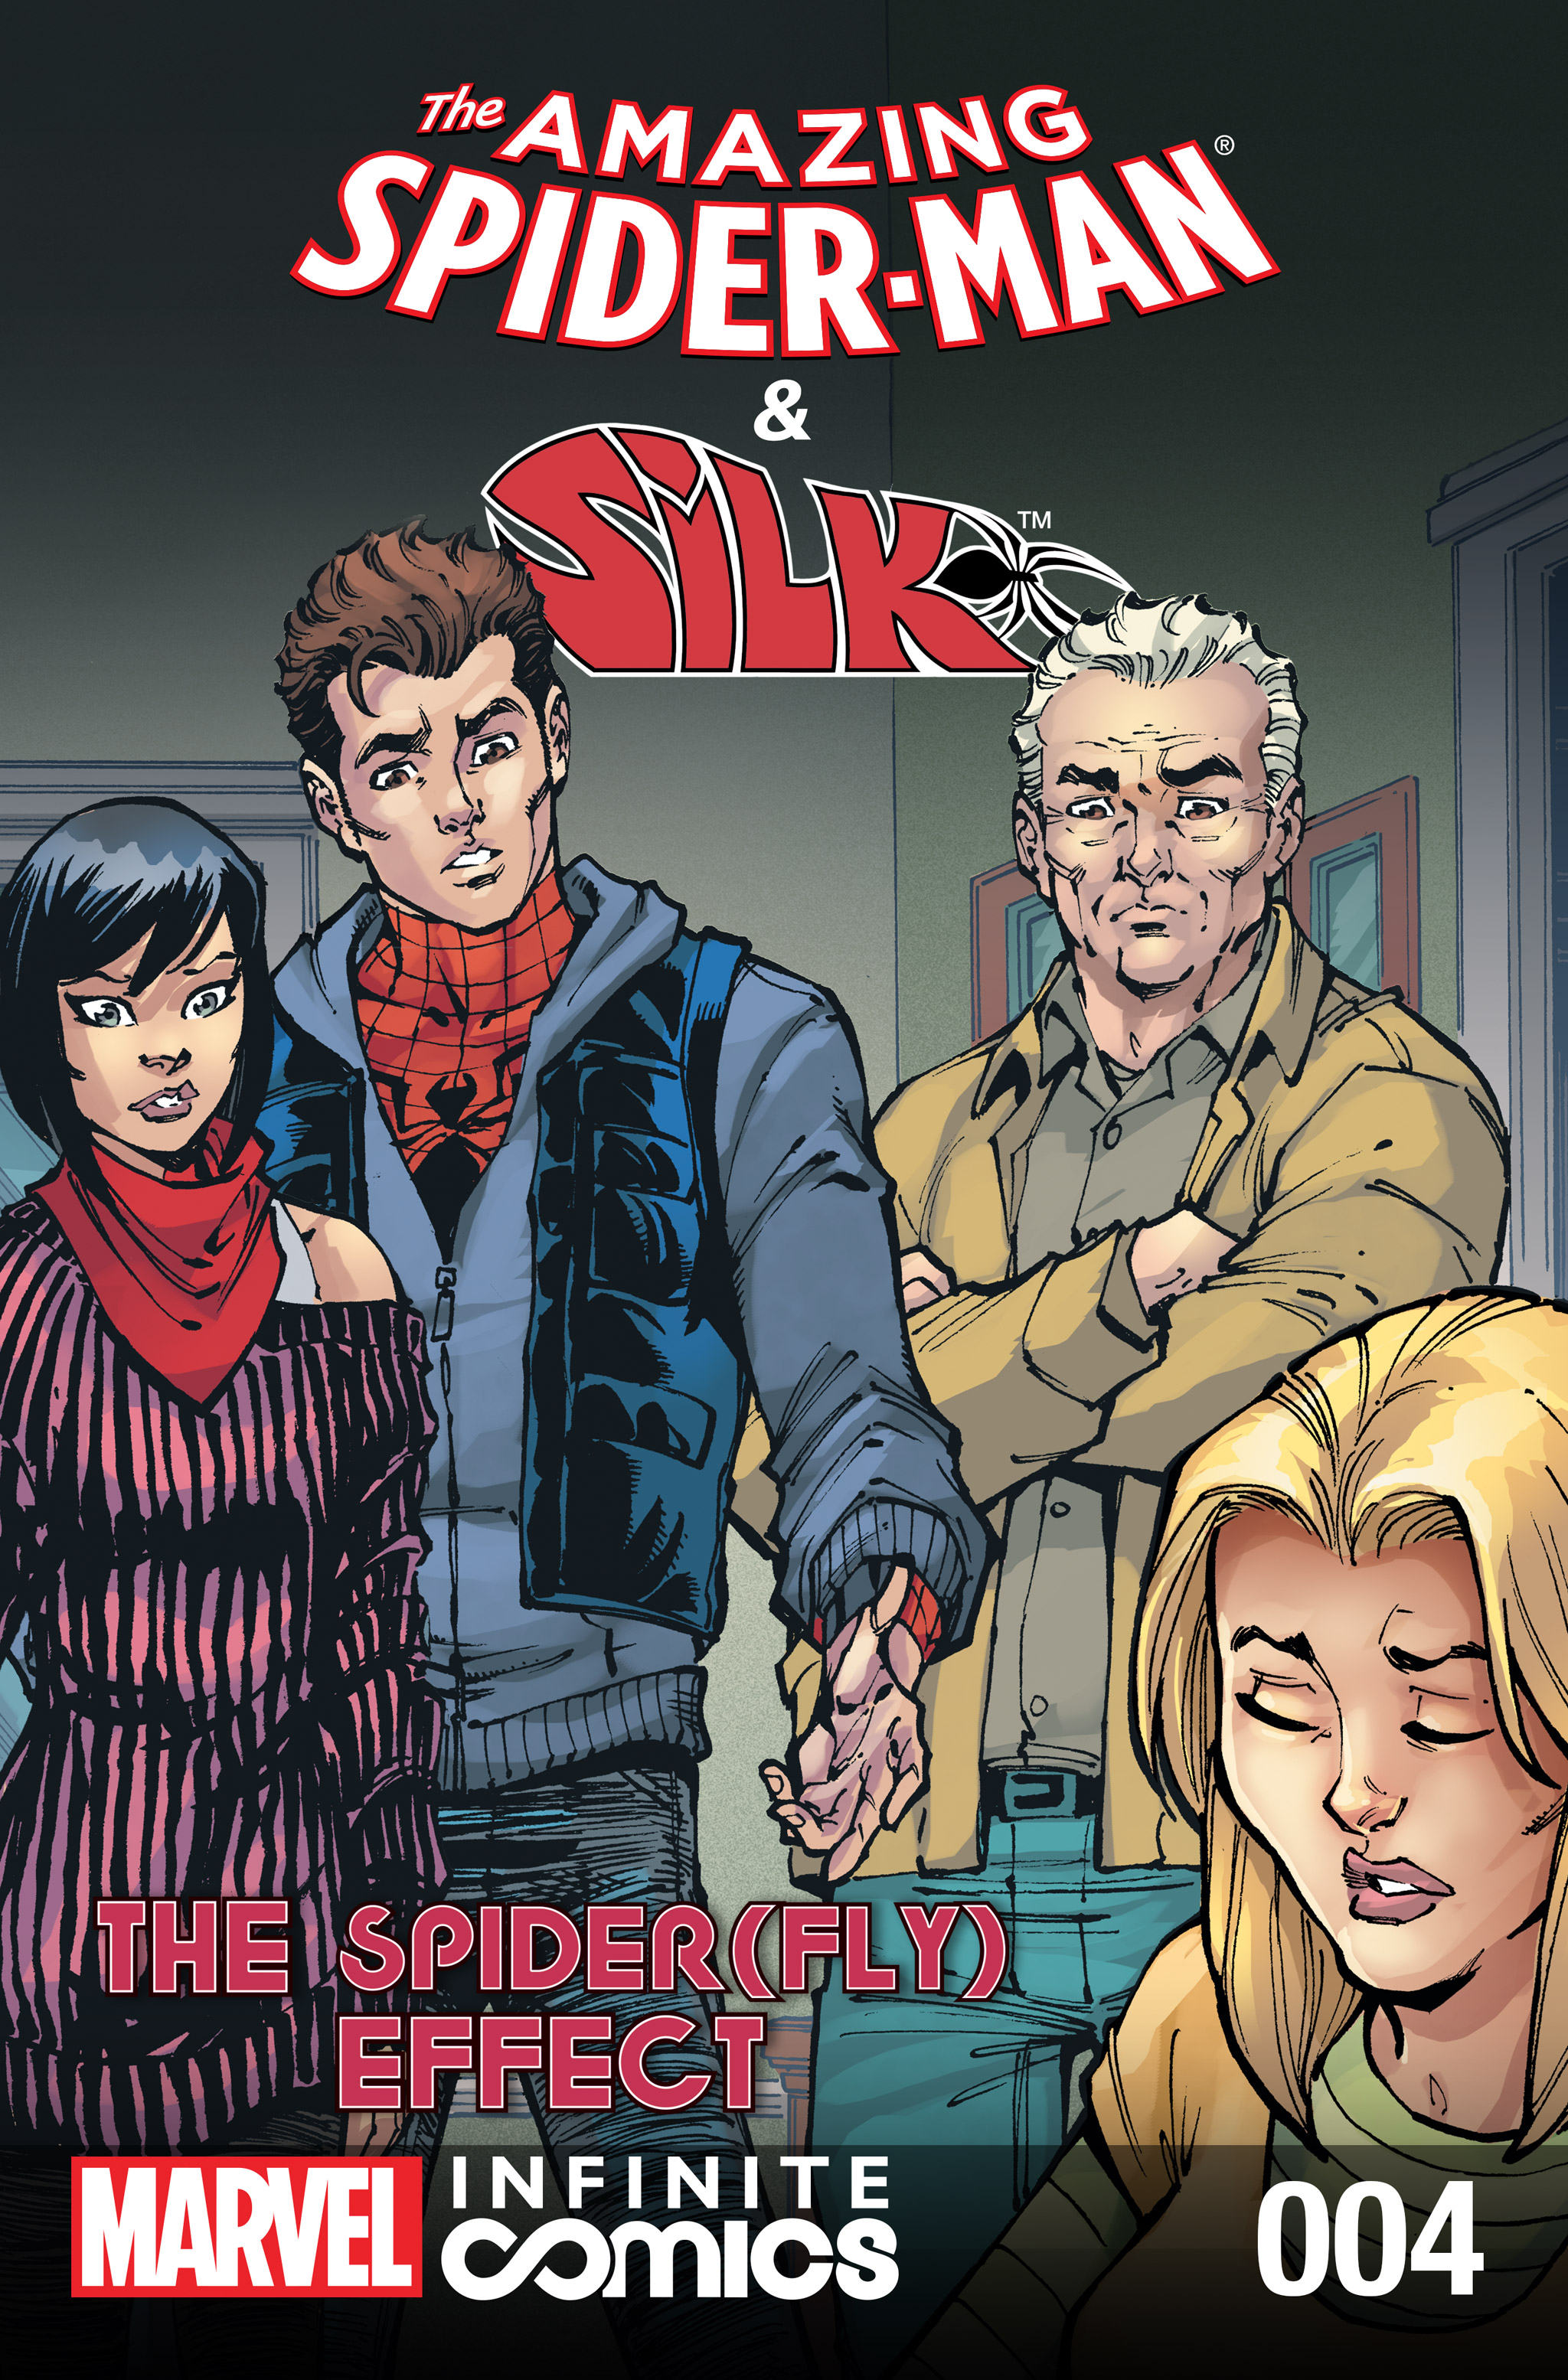 The Amazing Spider-Man & Silk: The Spider(fly) Effect (Infinite Comics) issue 4 - Page 1